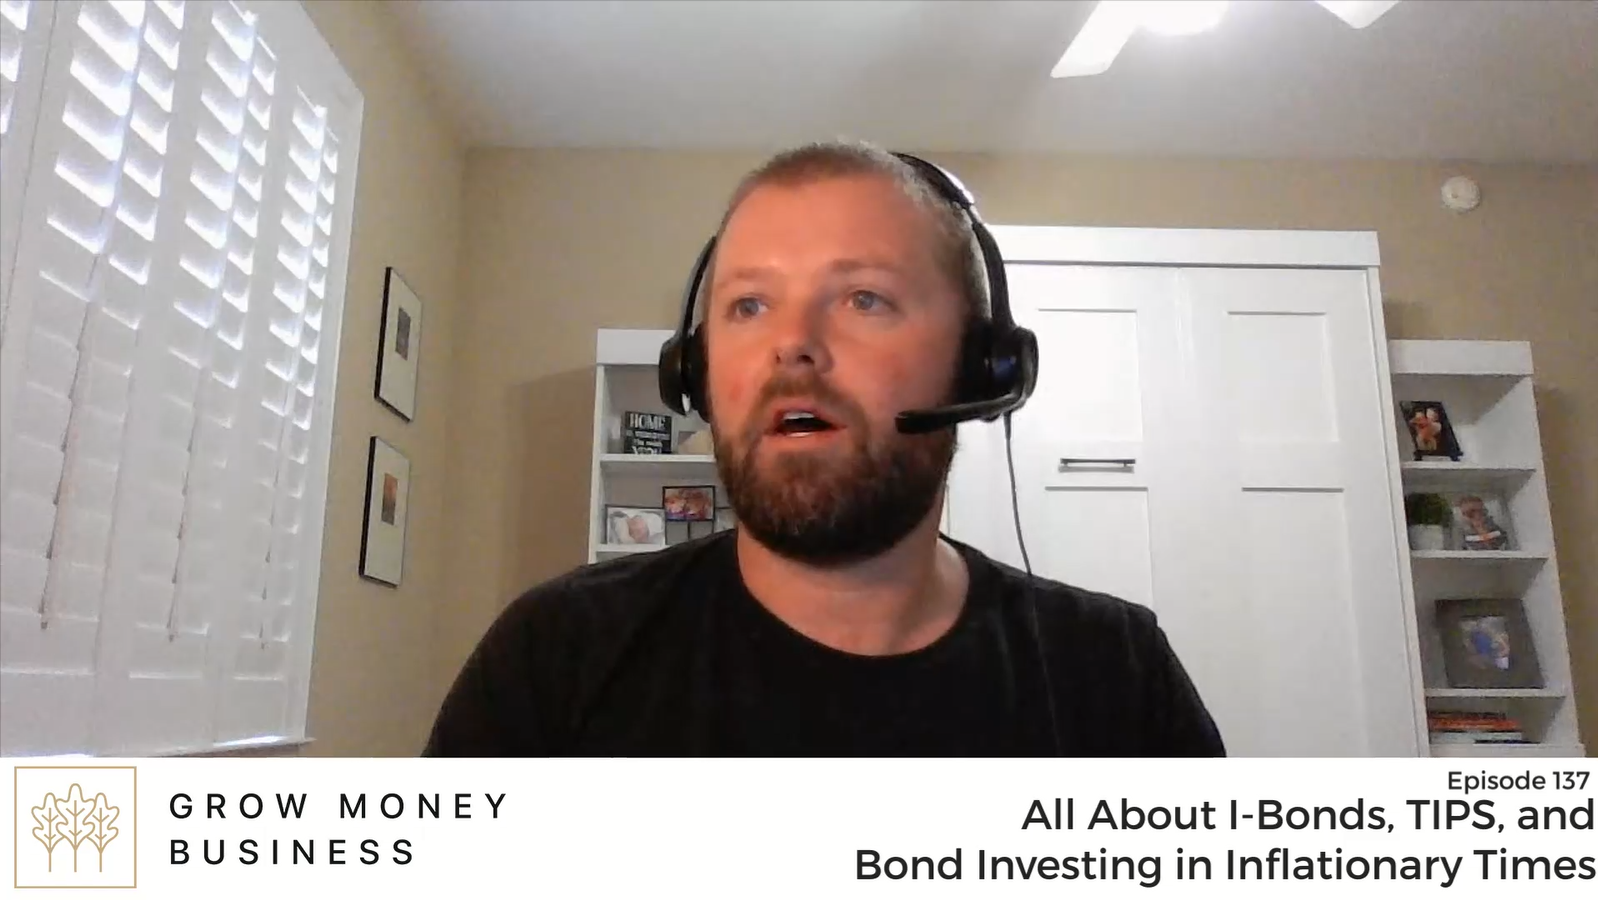 All About I-Bonds, TIPS, and Bond Investing in Inflationary Times | Ep 137 main image